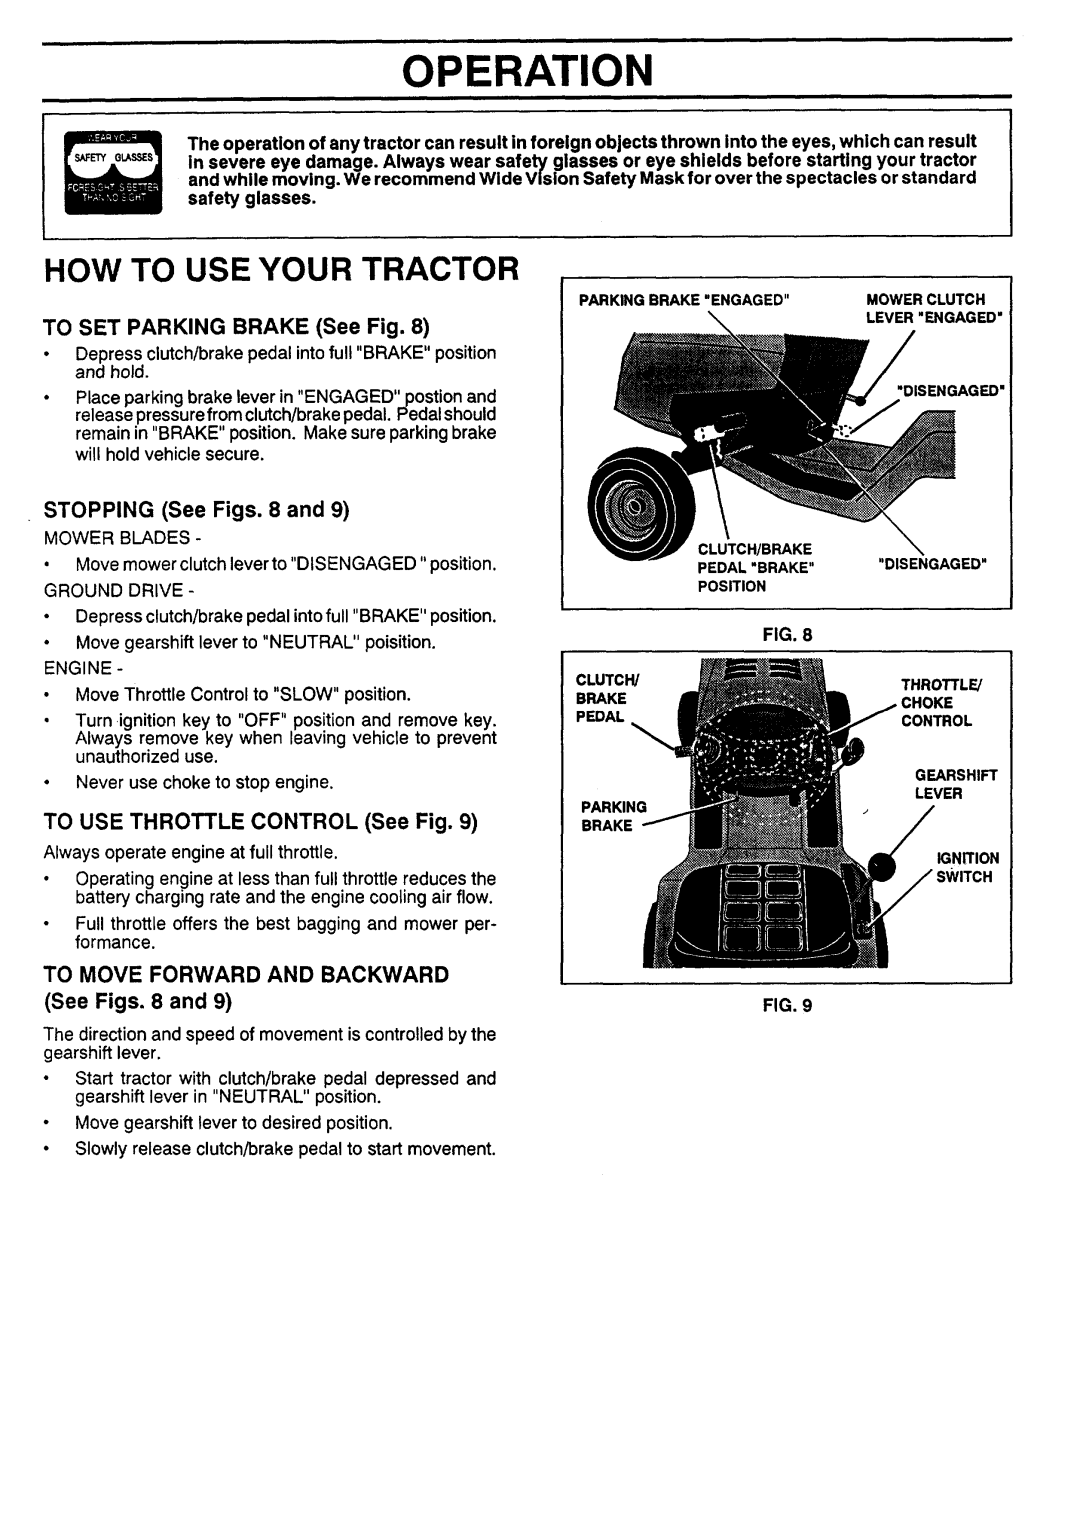 Sears 917.257462 manual Operation, How To Use Your Tractor, TO USE THROTTLE CONTROL See Fig, TO SET PARKING BRAKE See Fig 